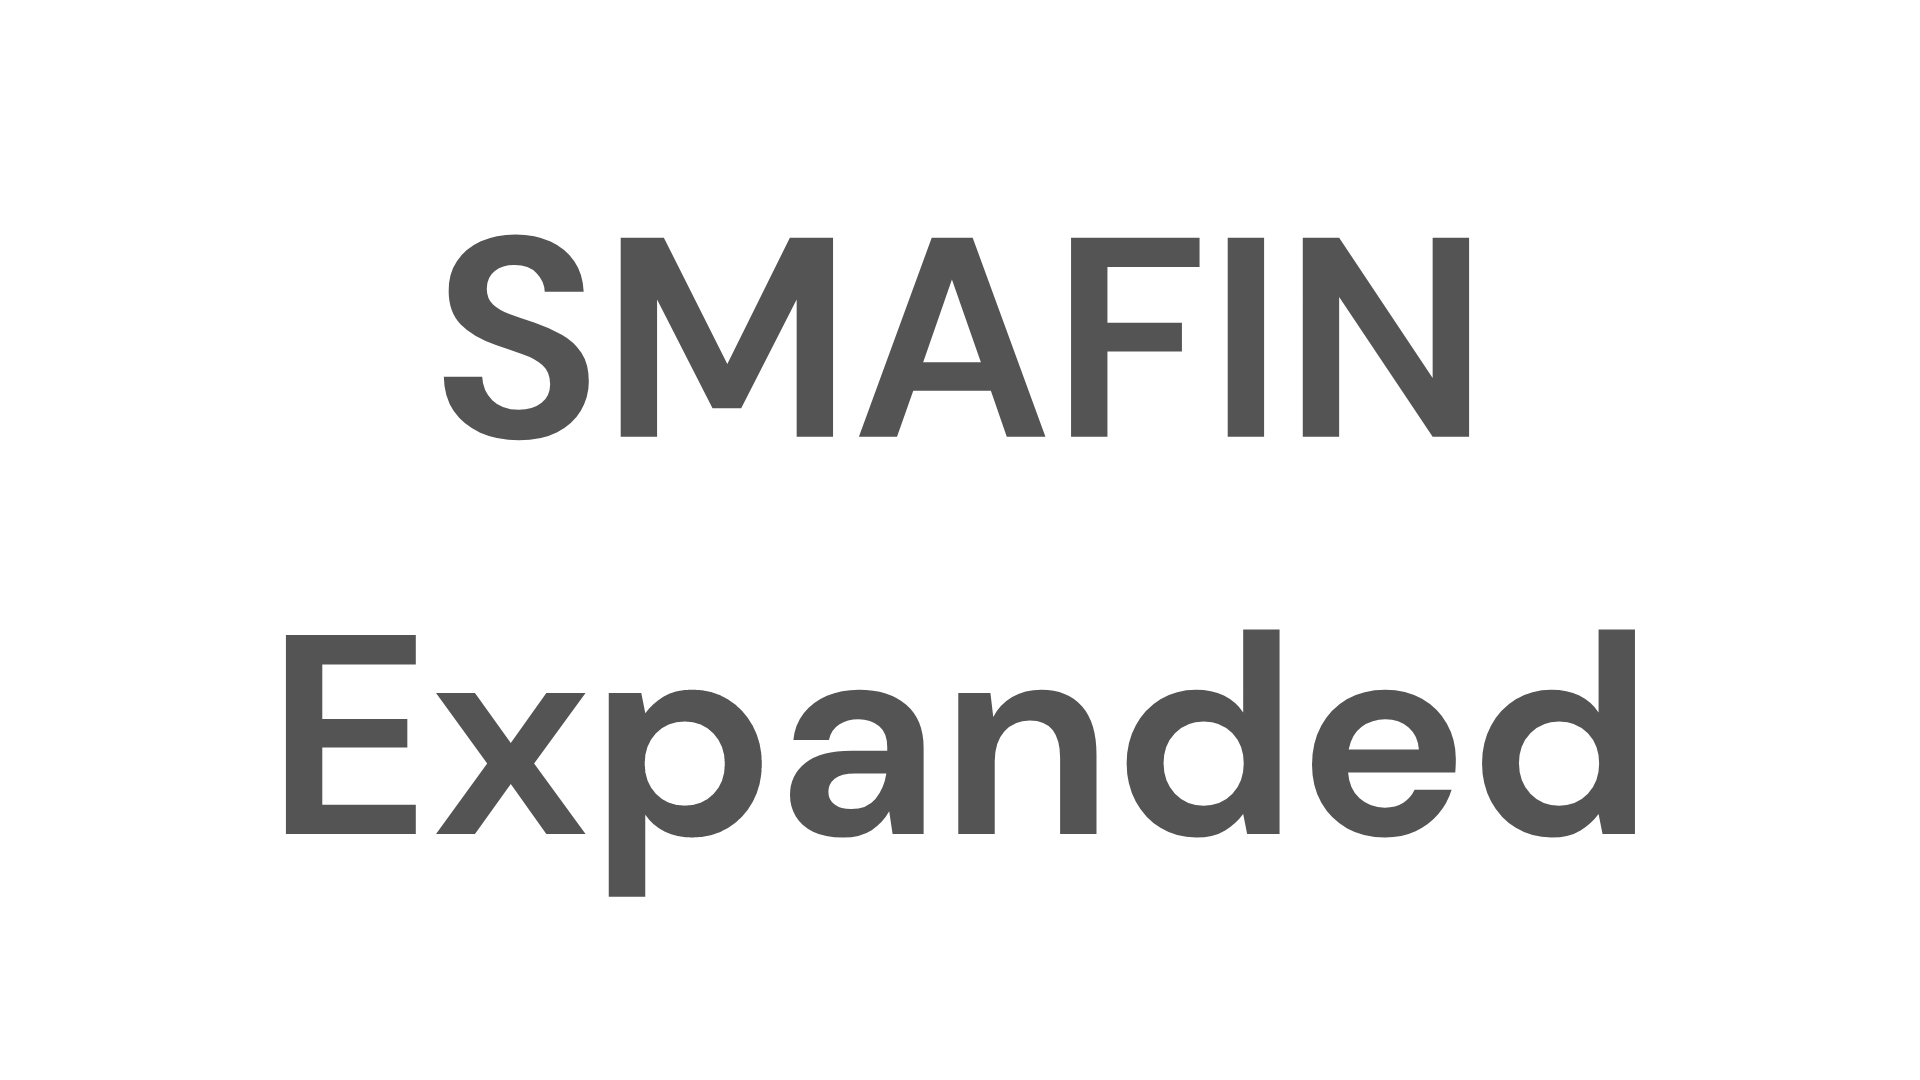 SMAFIN Expanded